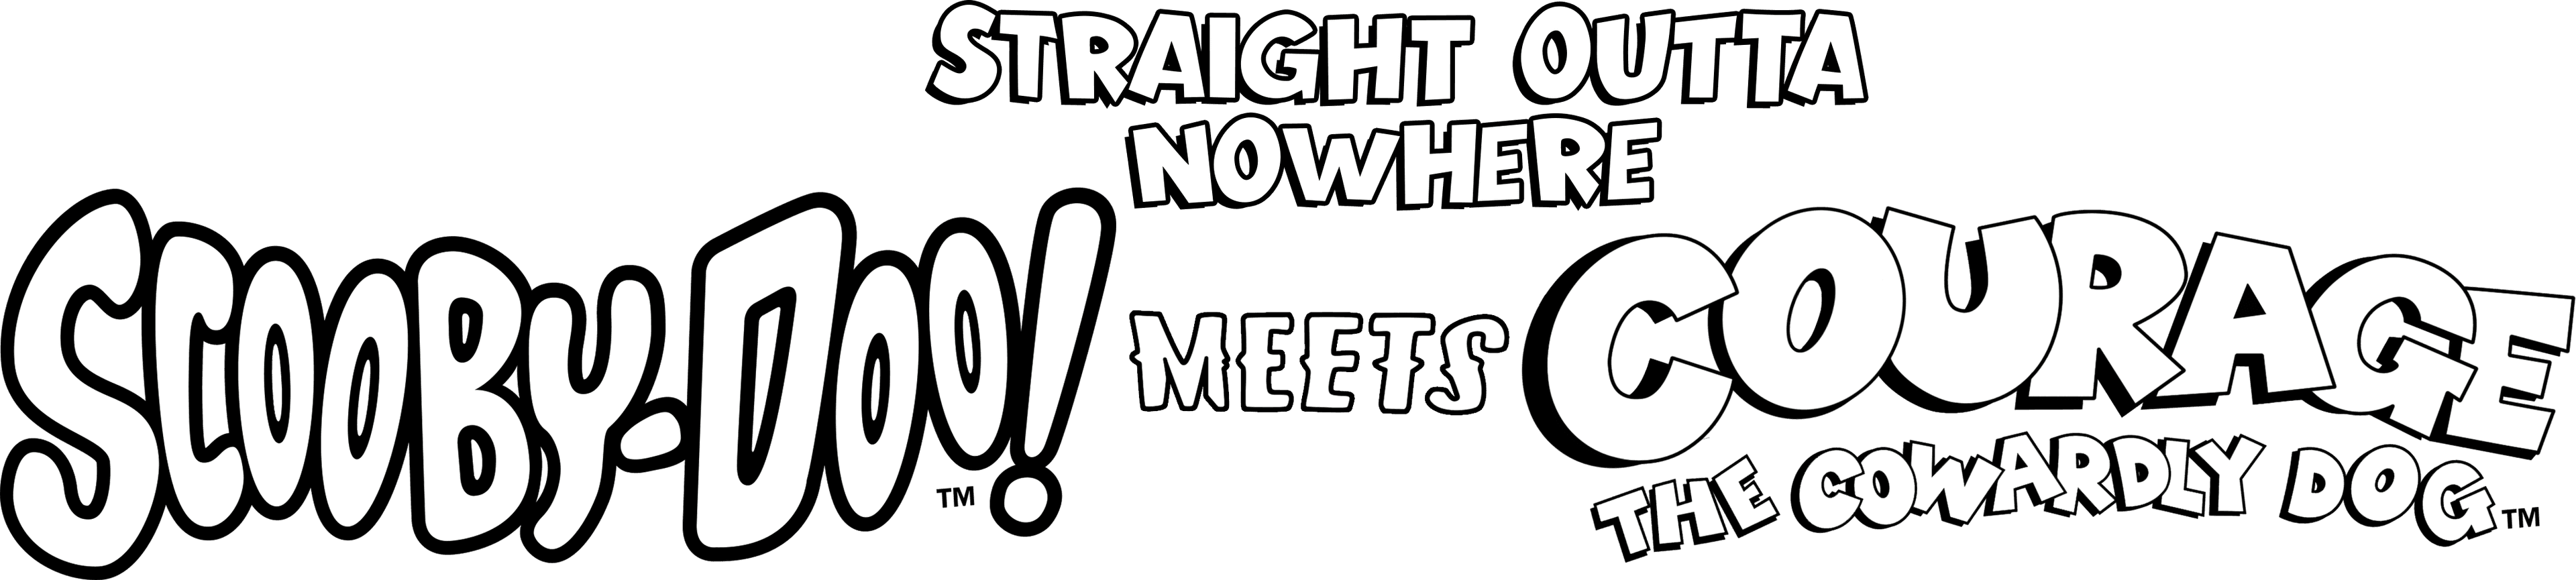 Straight Outta Nowhere: Scooby-Doo! Meets Courage the Cowardly Dog logo